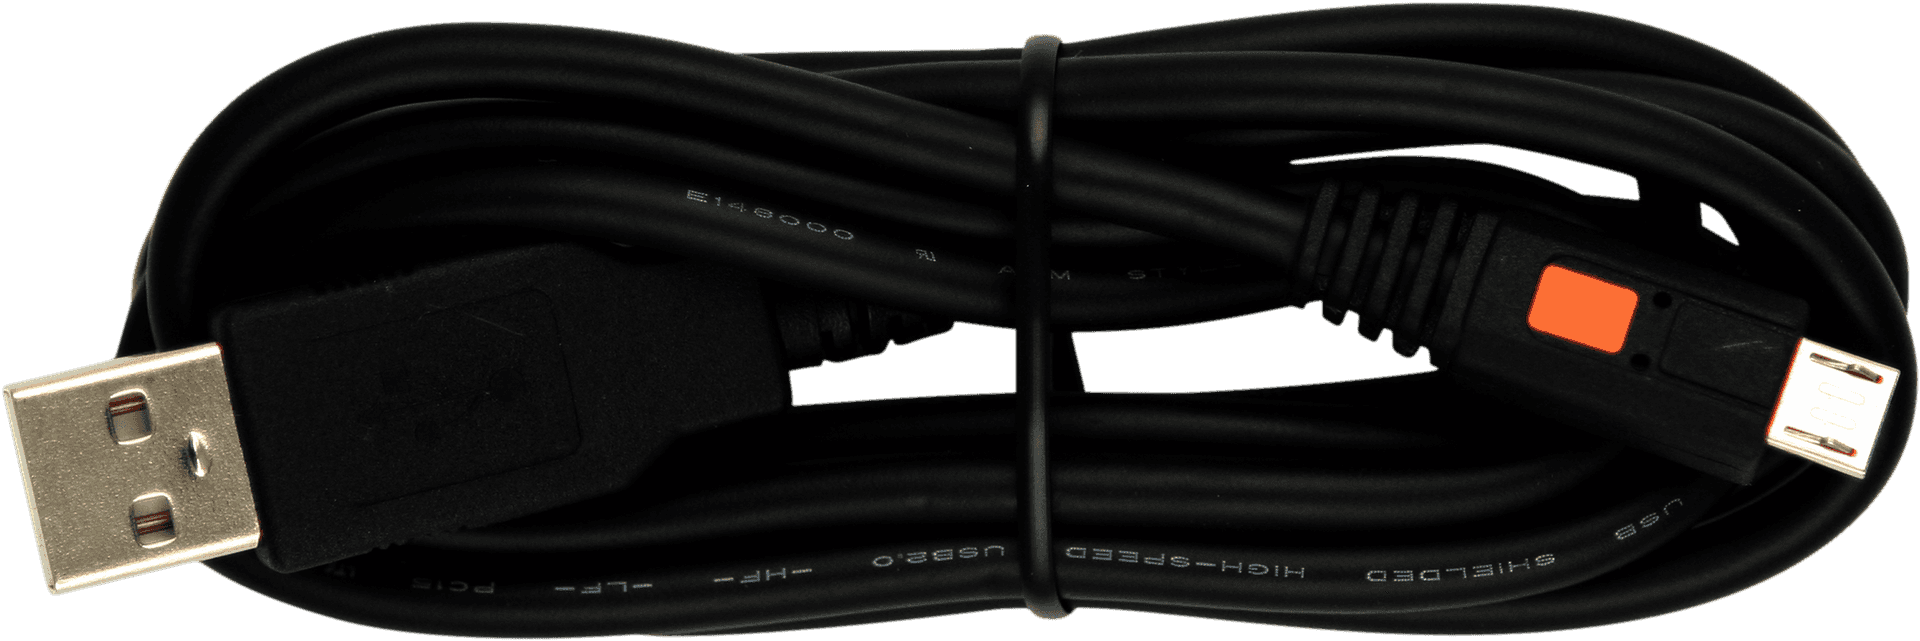 Black U S B Cablewith Red Insert PNG